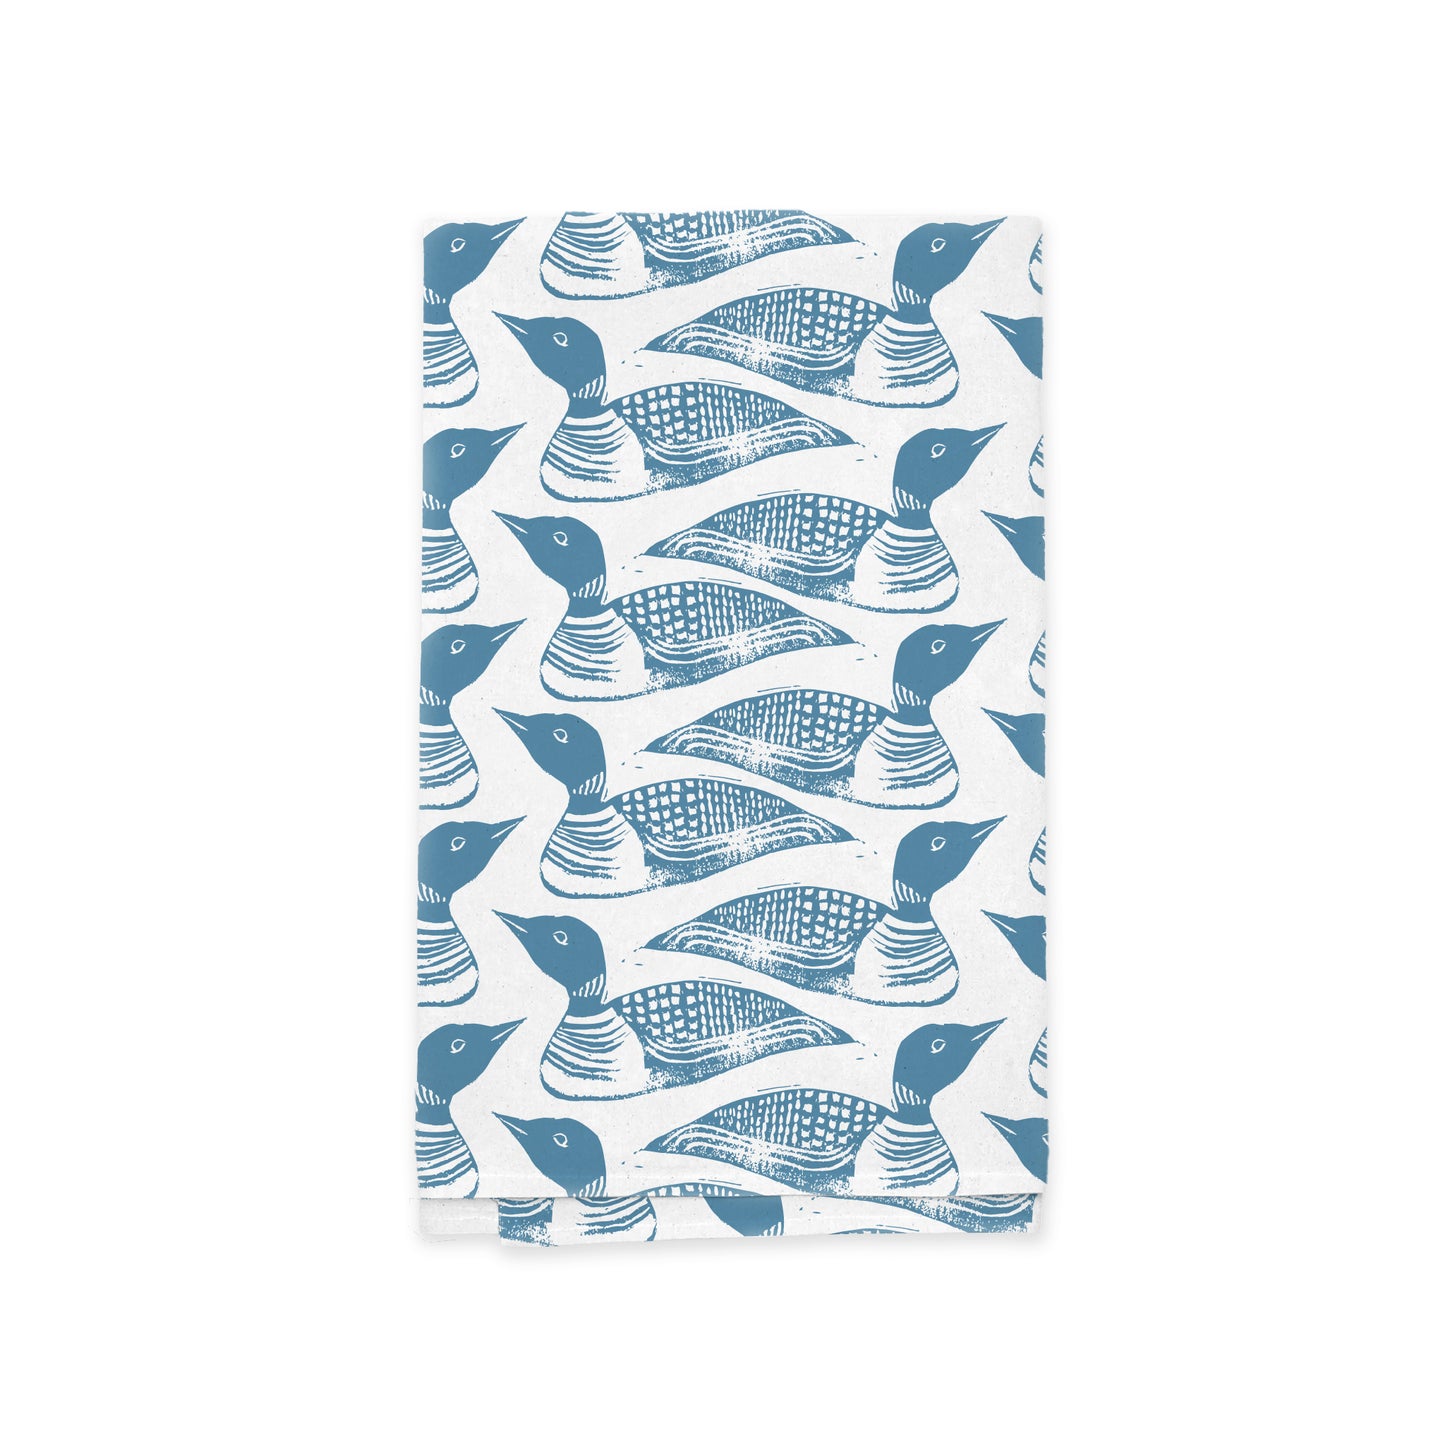 Sentence with replaced product name and brand name: A Maine Loon Pattern Kitchen Tea Towel from Rustic County, with a repetitive pattern of blue stylized fish against a white background, designed with intricate line details on their bodies, perfect for kitchen decor.